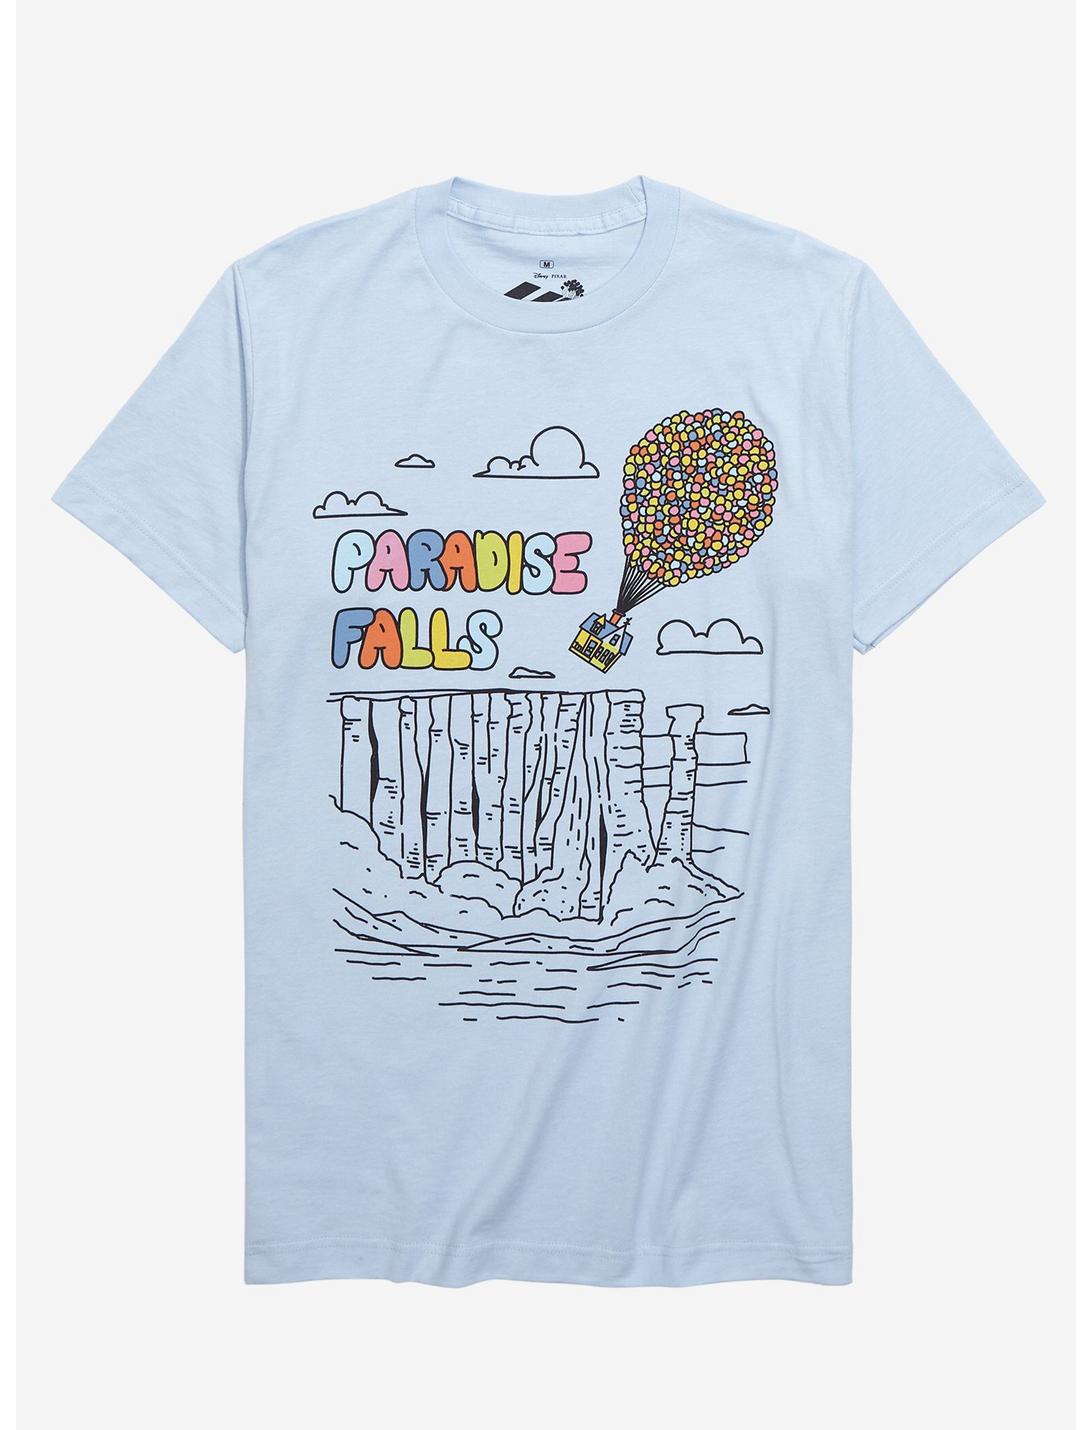 Up Paradise Falls Balloon Sketch Women's T-Shirt - BoxLunch Exclusive, LIGHT BLUE, hi-res